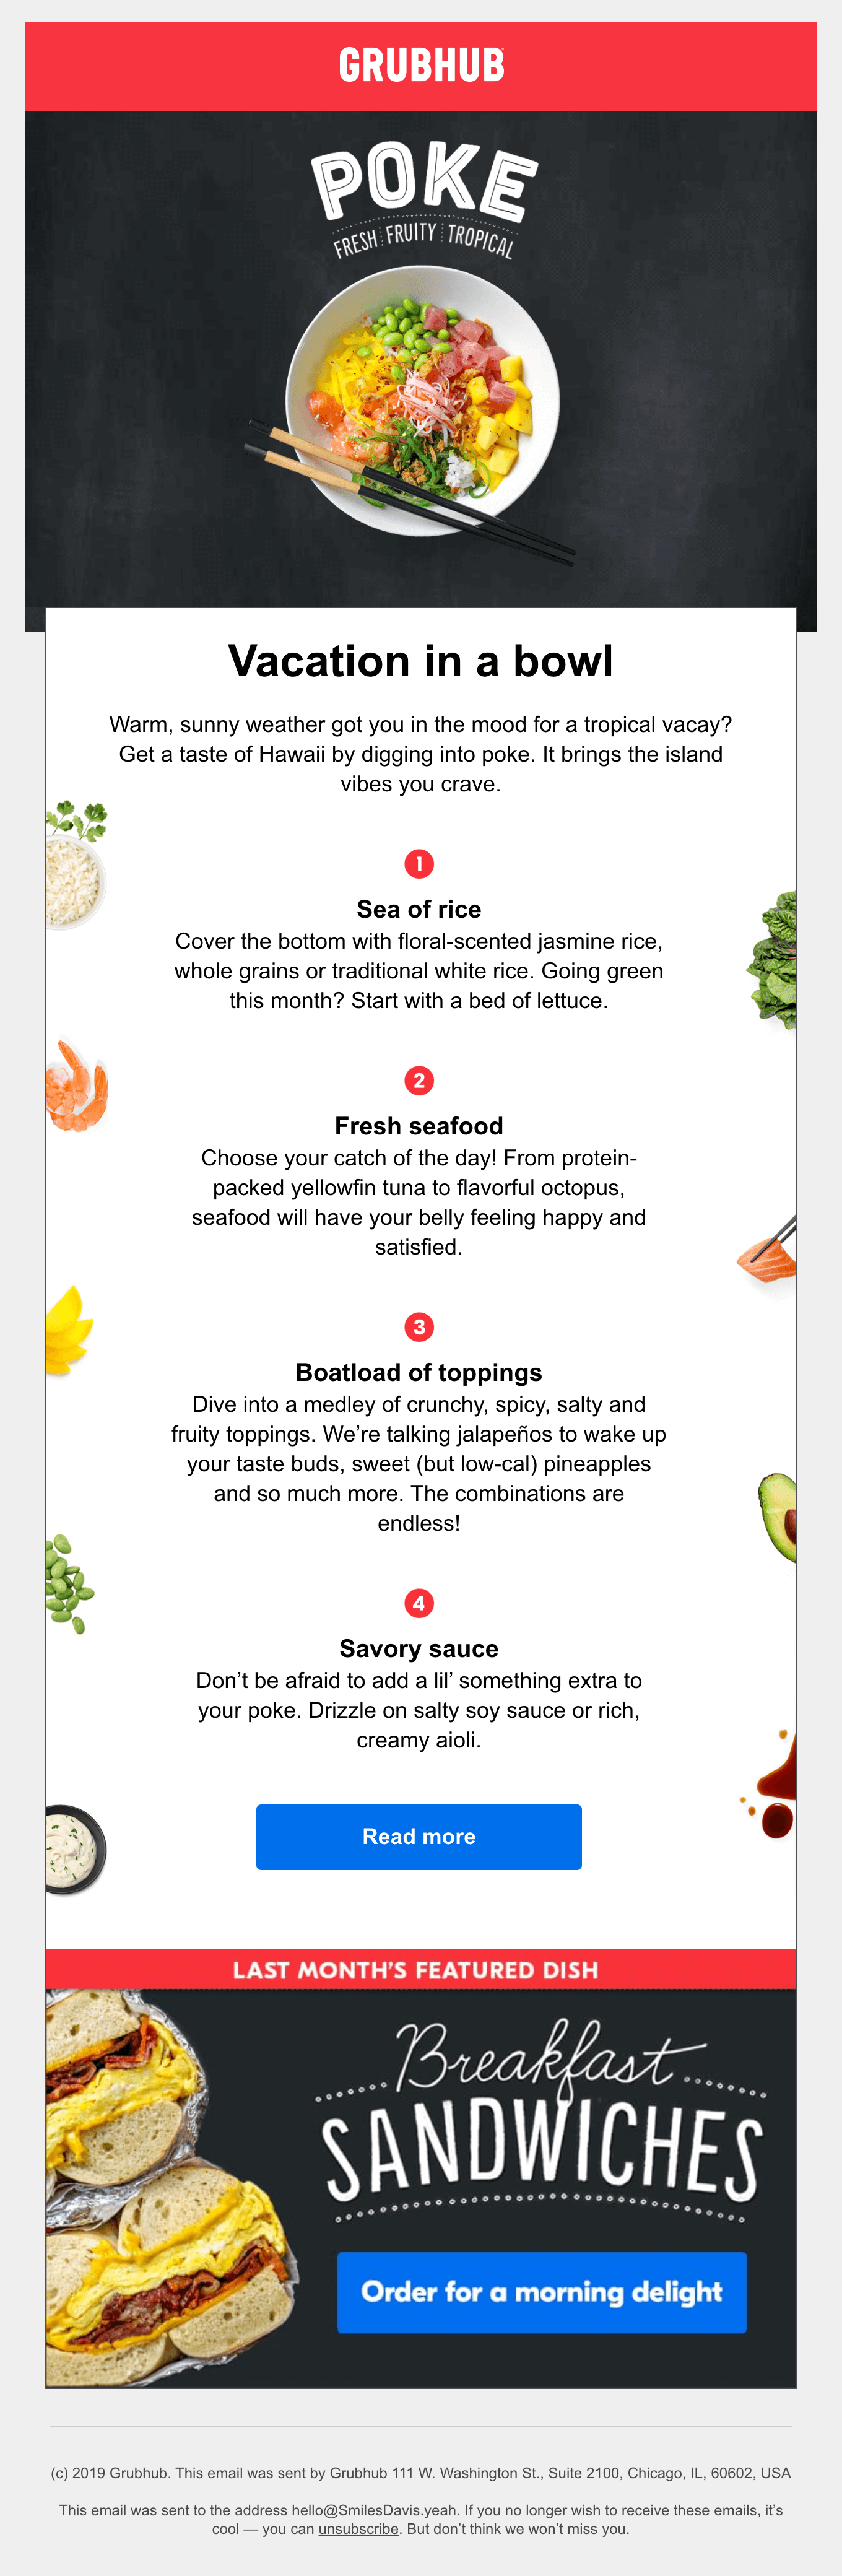 Our Dish of the Month: Poke